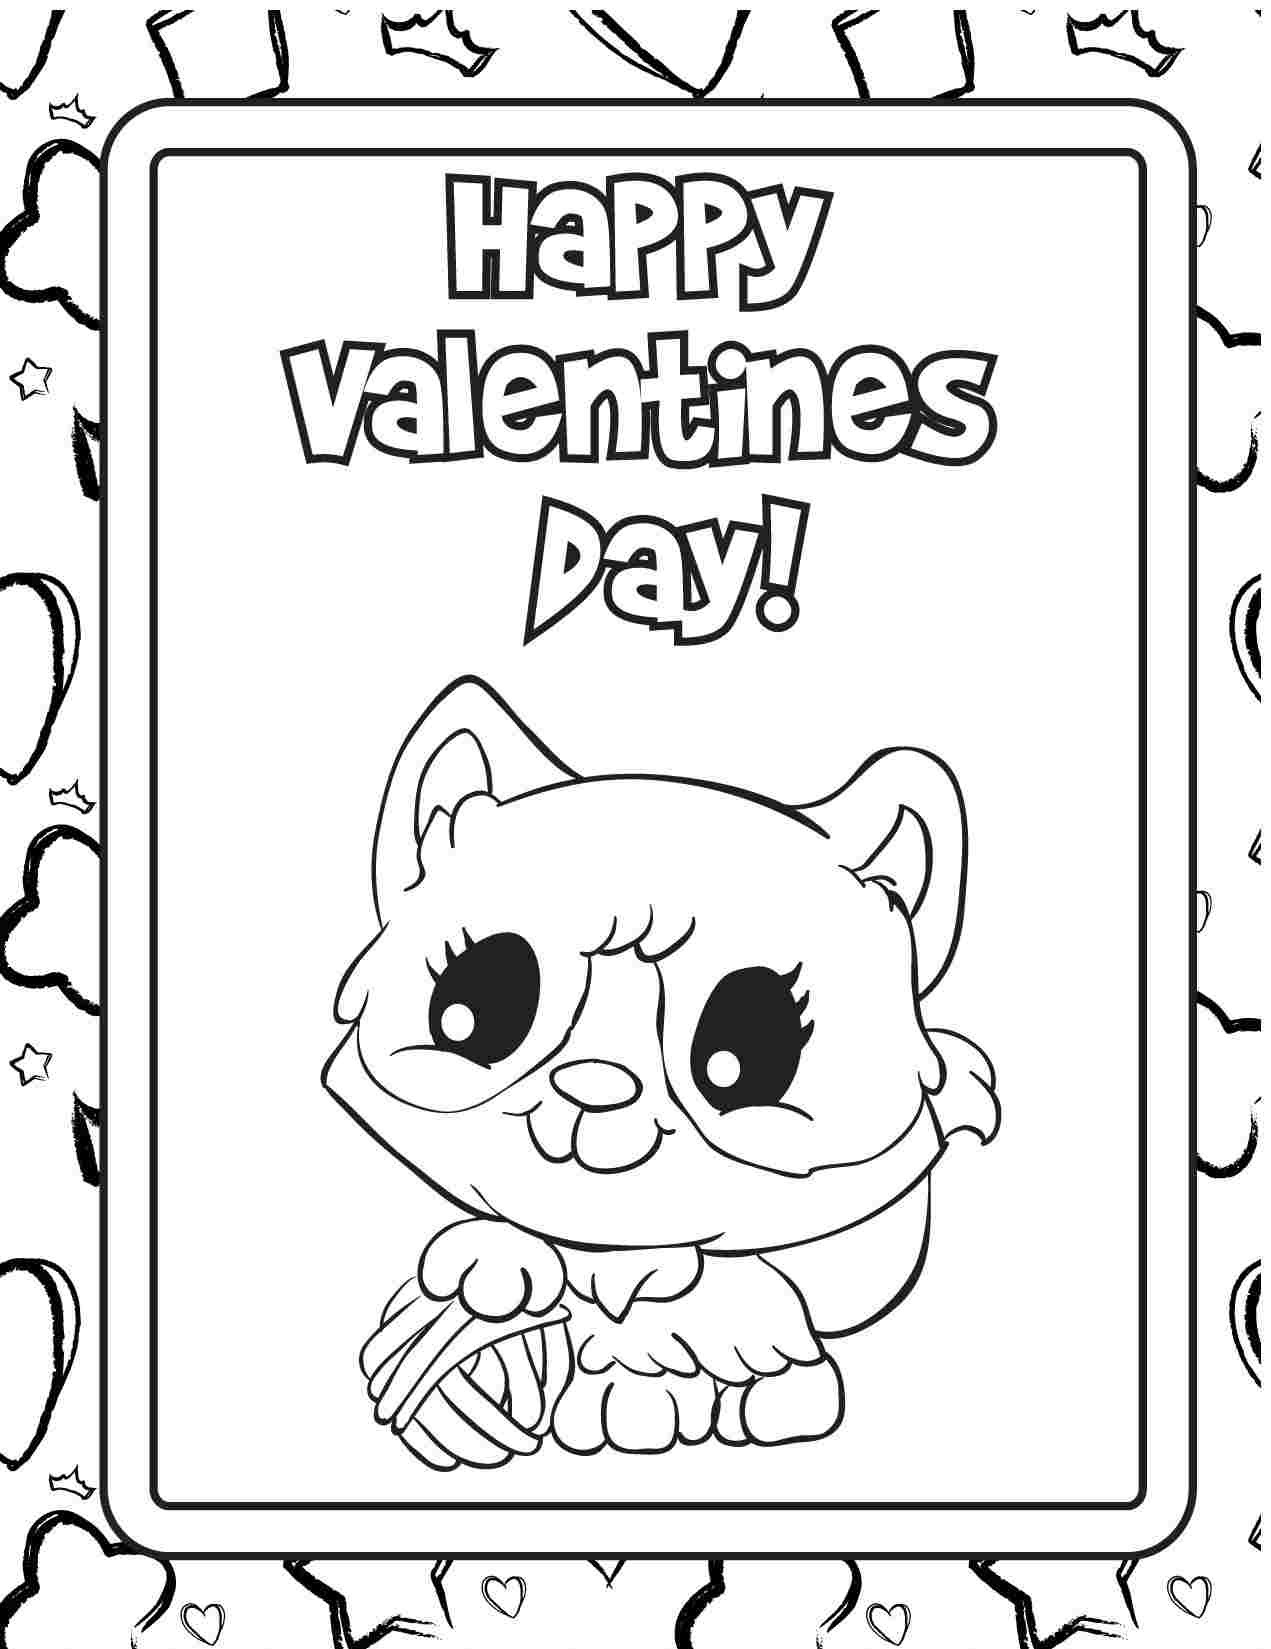 Printable Coloring Pages Valentines Day Cards at